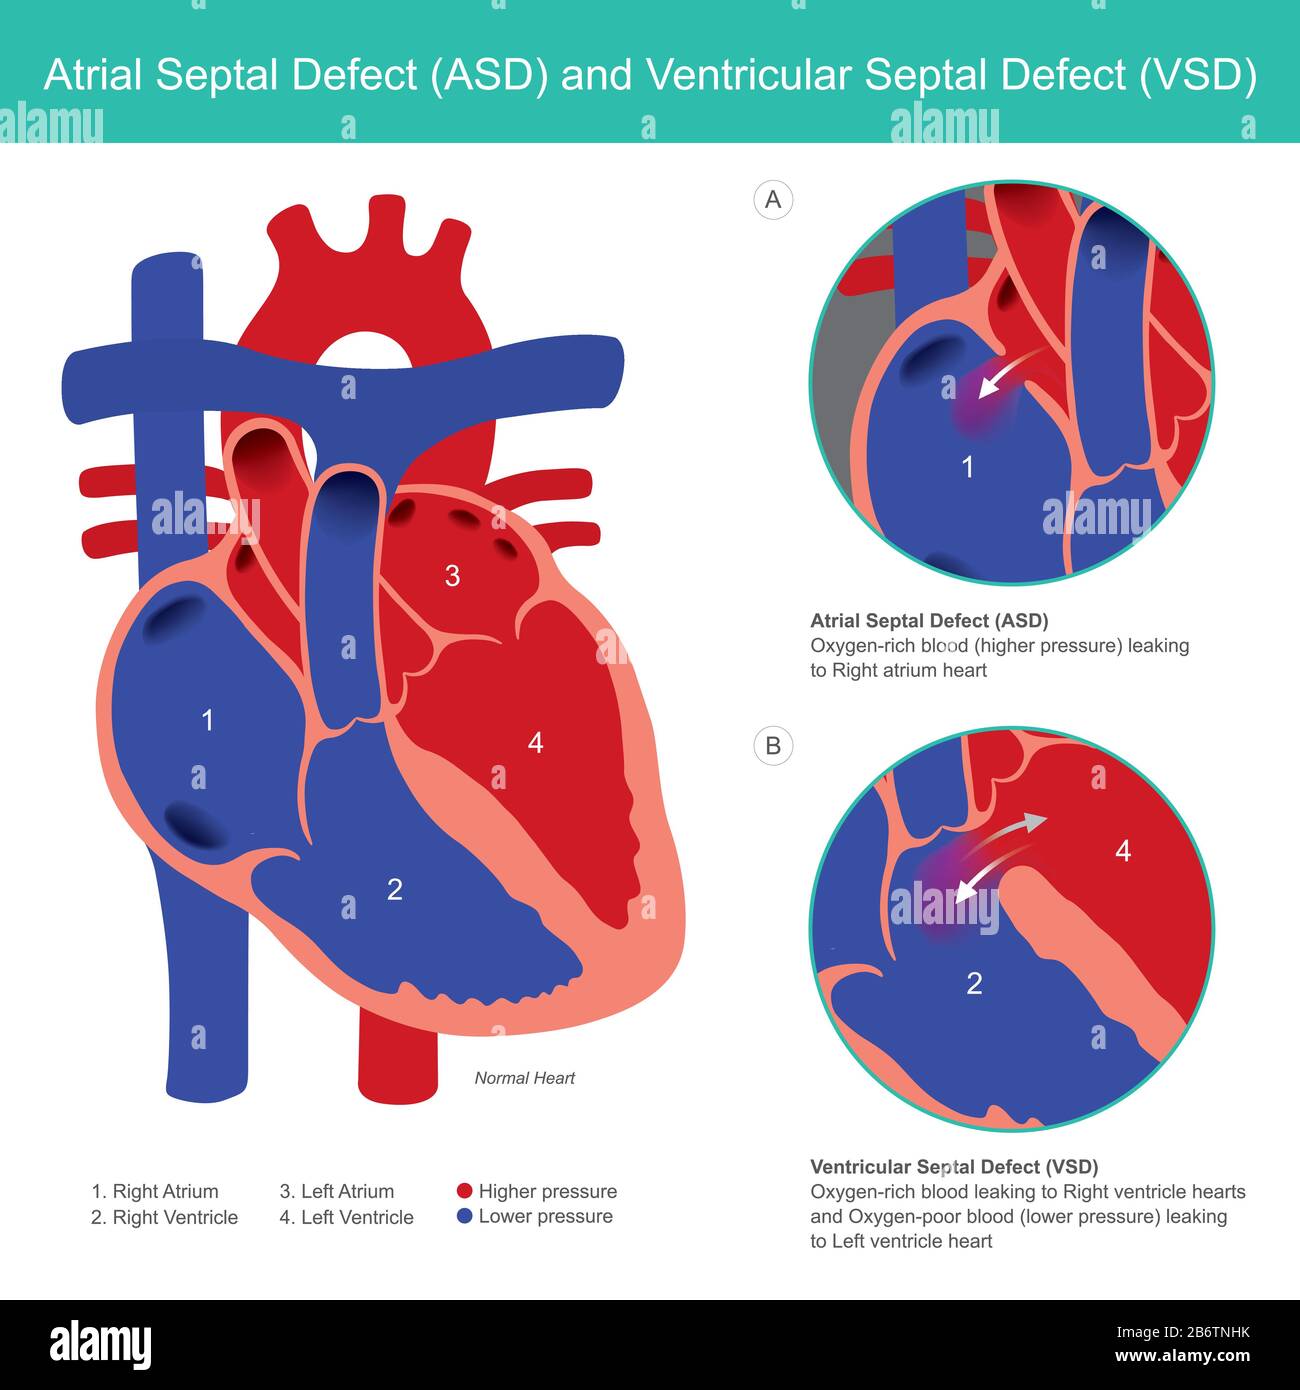 Atrial Septal Defect (ASD) and Ventricular Septal Defect (VSD). Abnormal of the heart atrial and heart ventricle from baby birth. Stock Vector